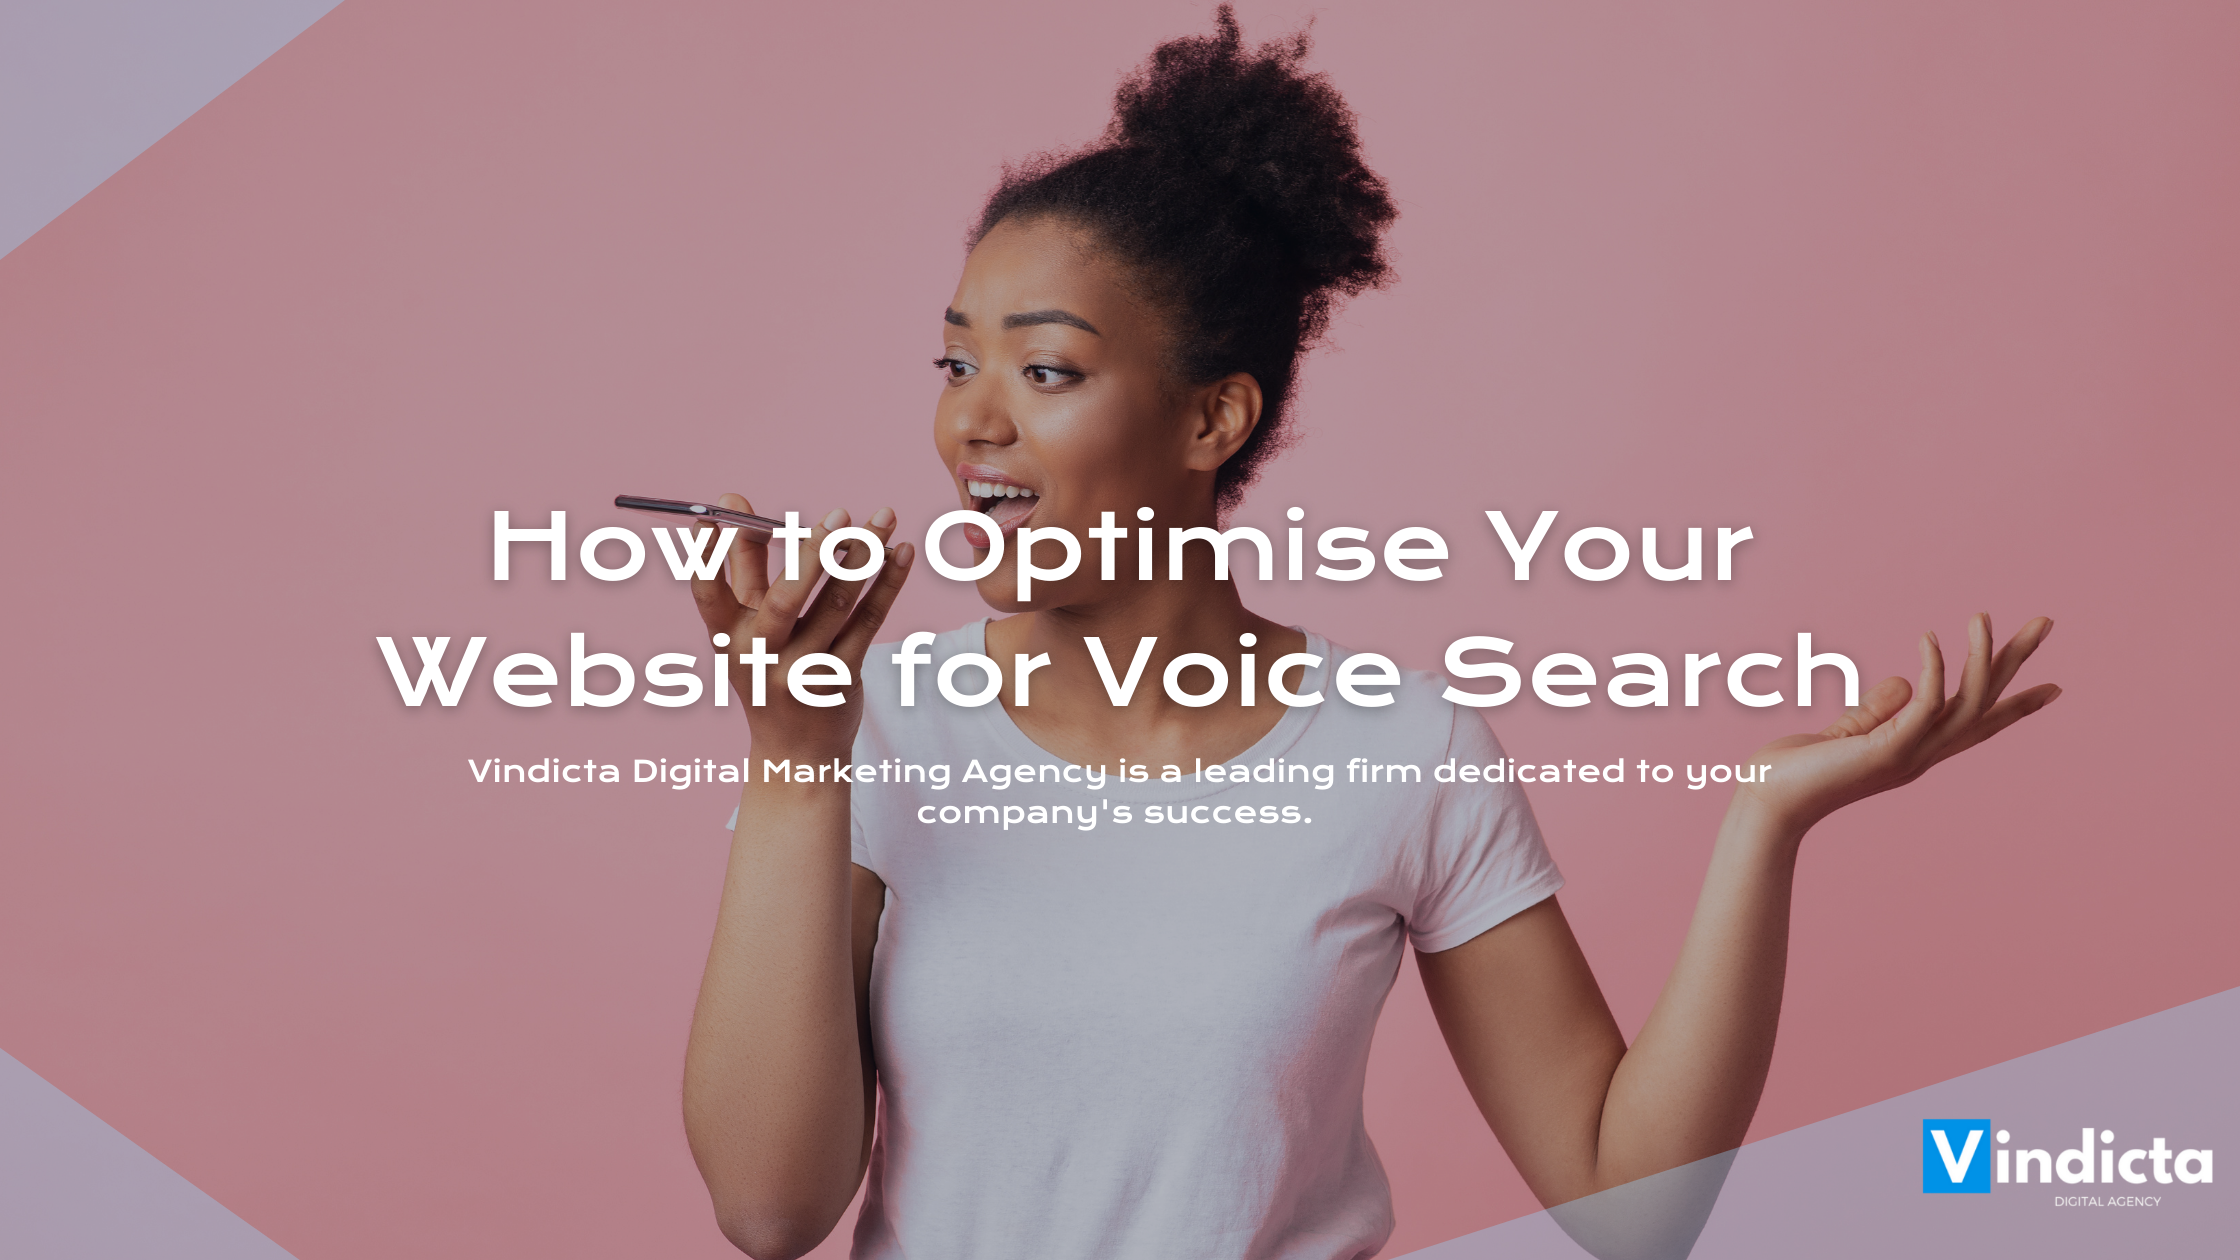 How to Optimise Your Website for Voice Search Devices